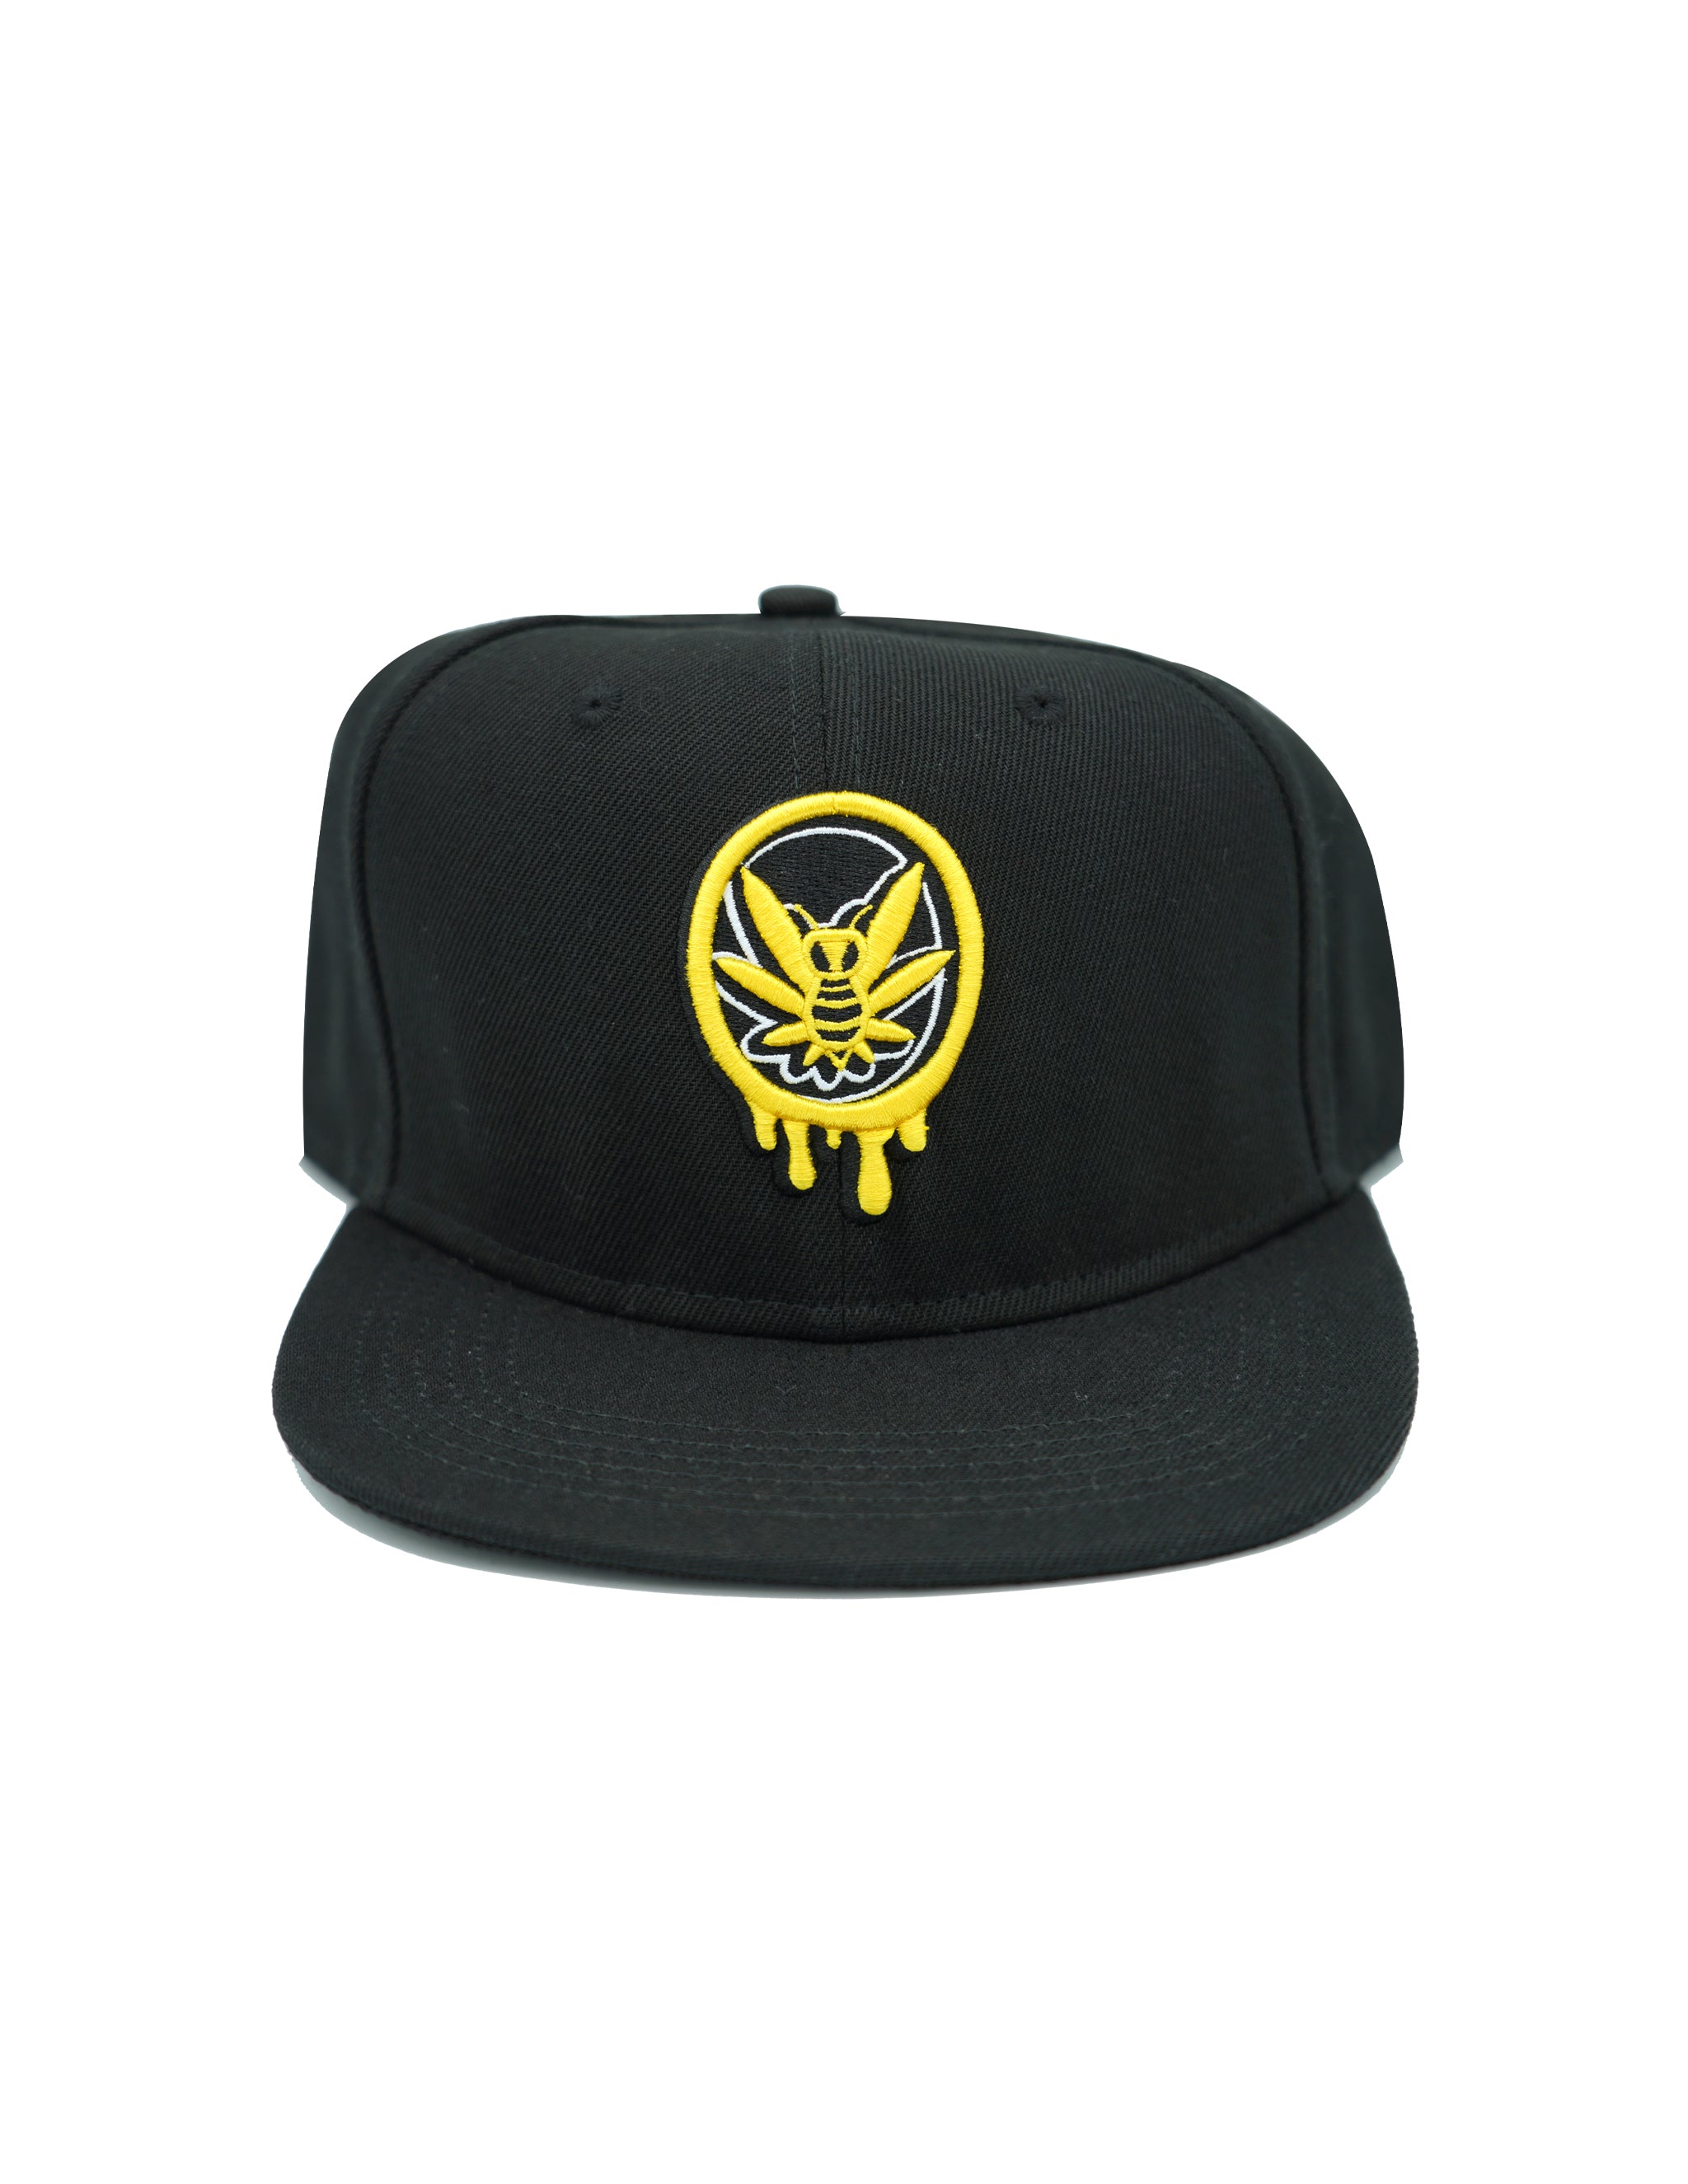 Cali Honey Bee Logo Fitted Hat